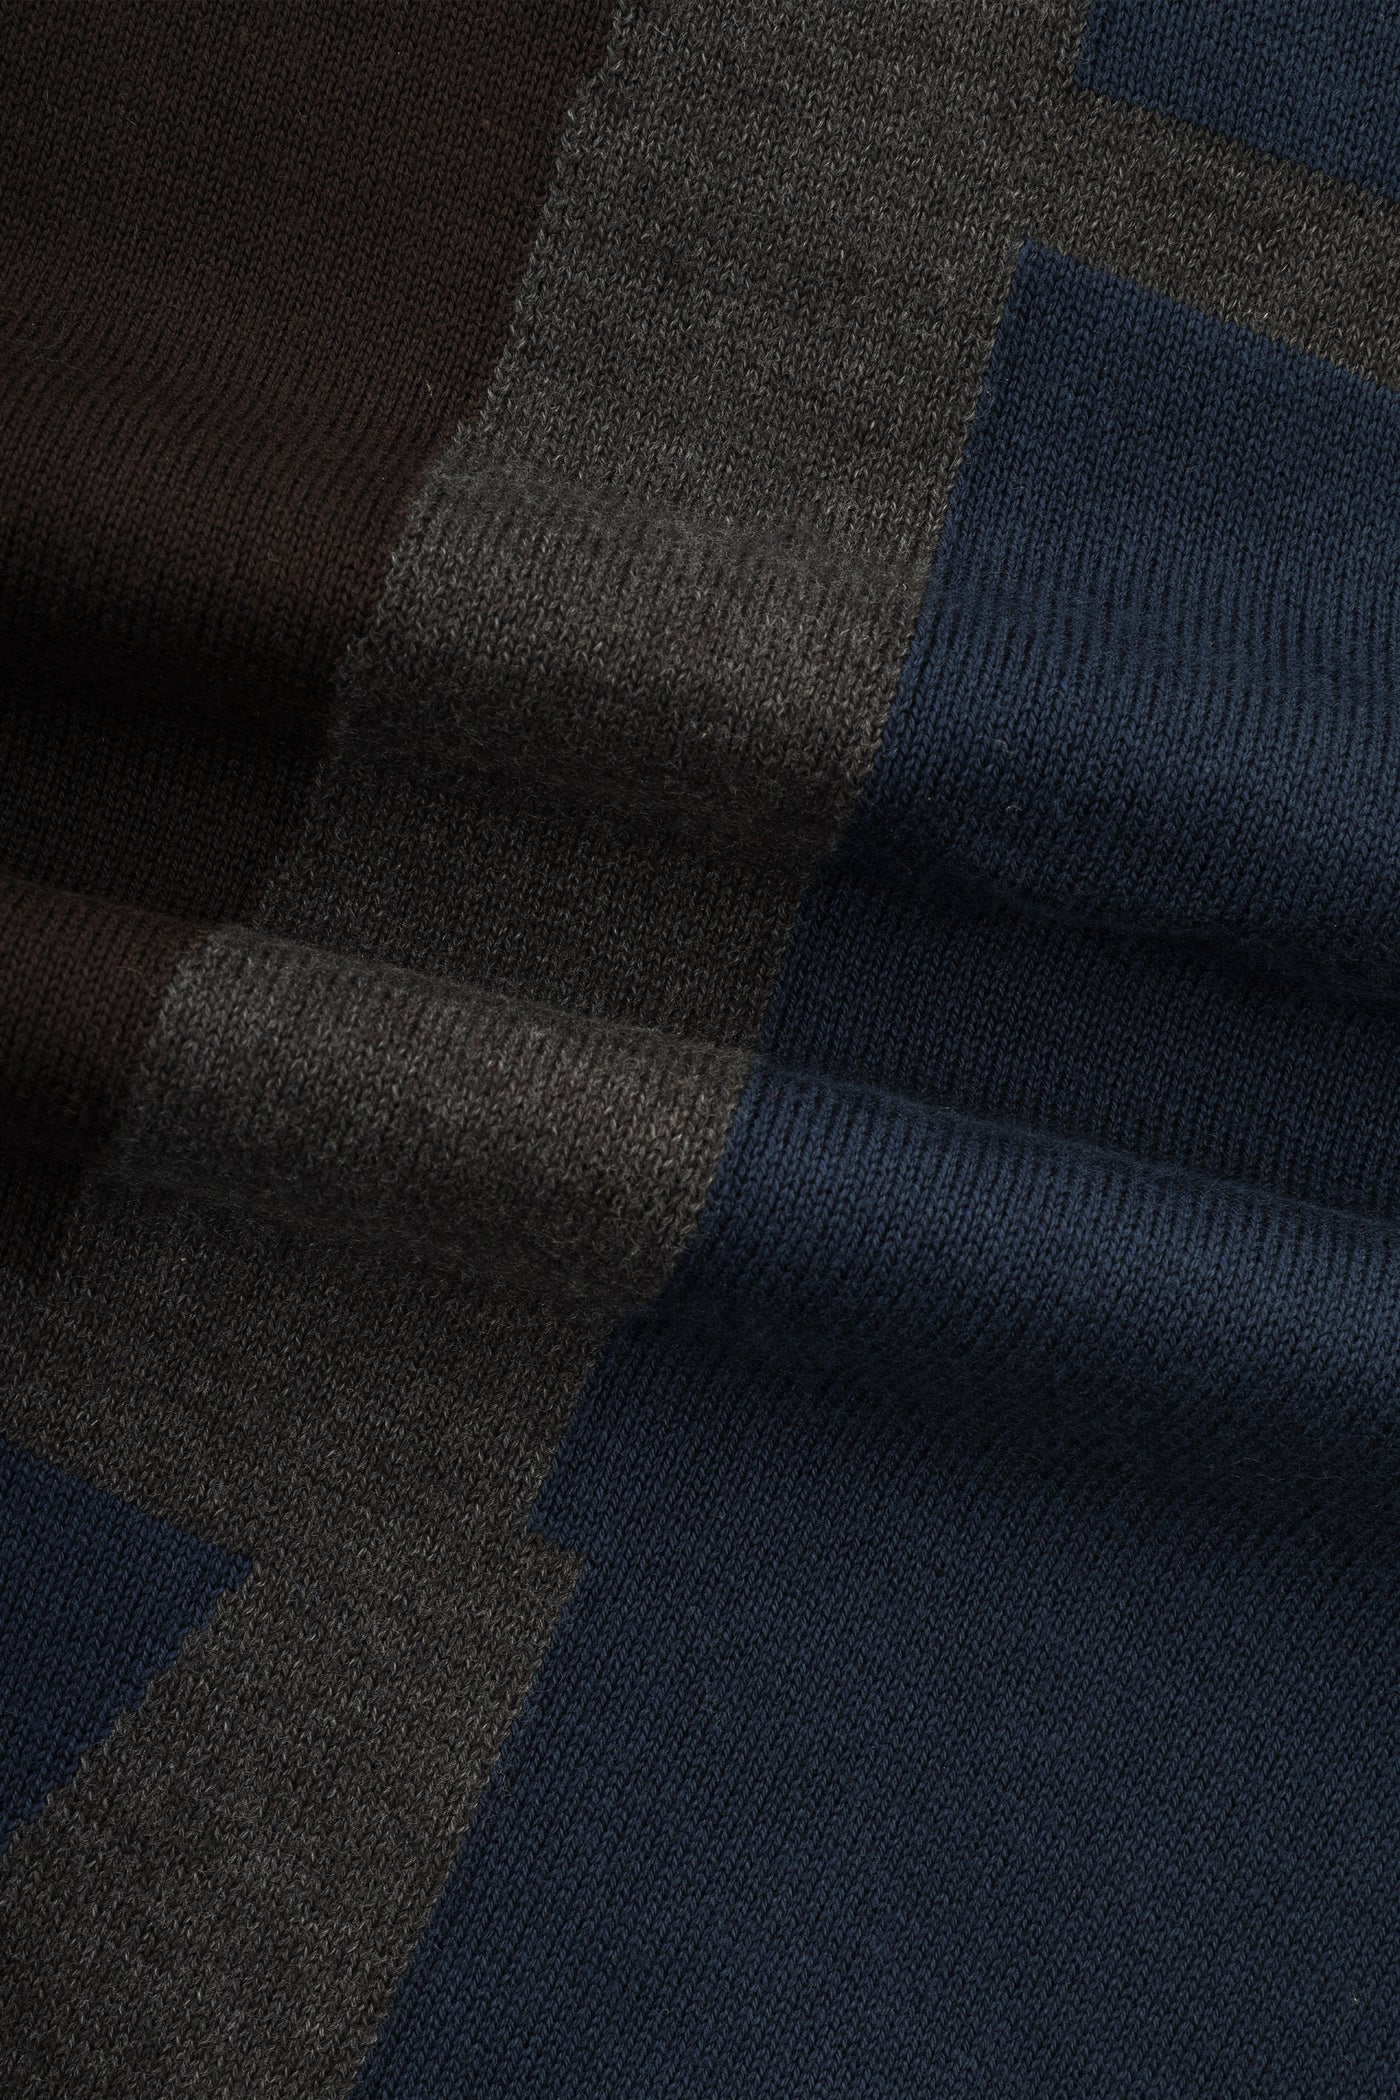 Jacquard Knitted High-neck Brown & Navy Pullover